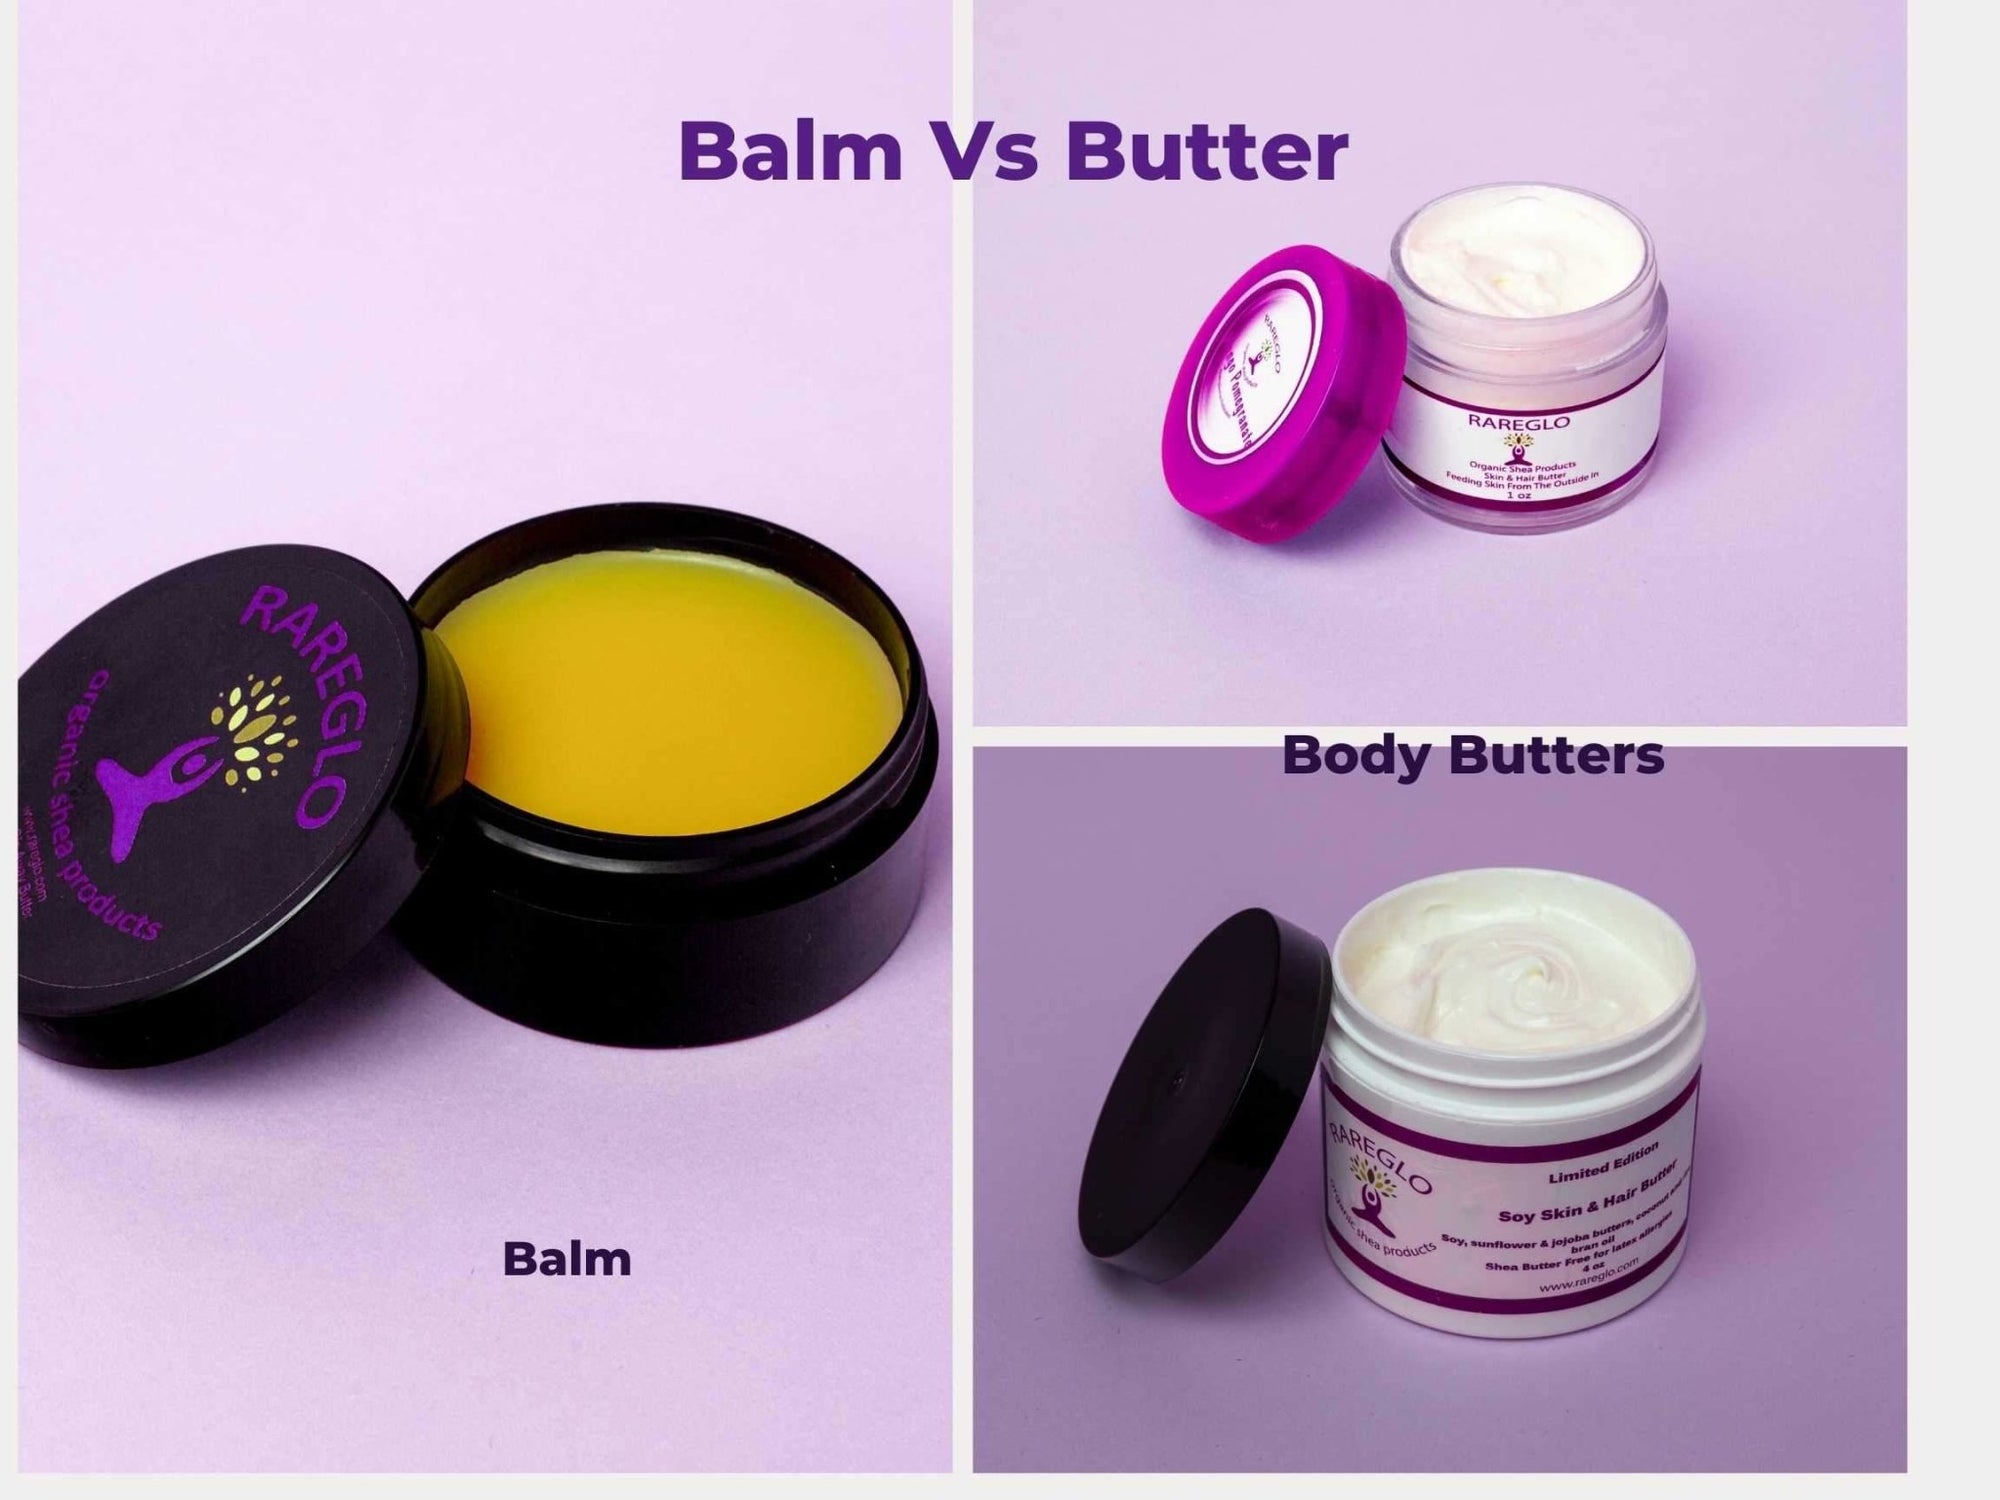 Balms vs. Butters...What Is Your Preference? - RareGlo Organic Shea Products